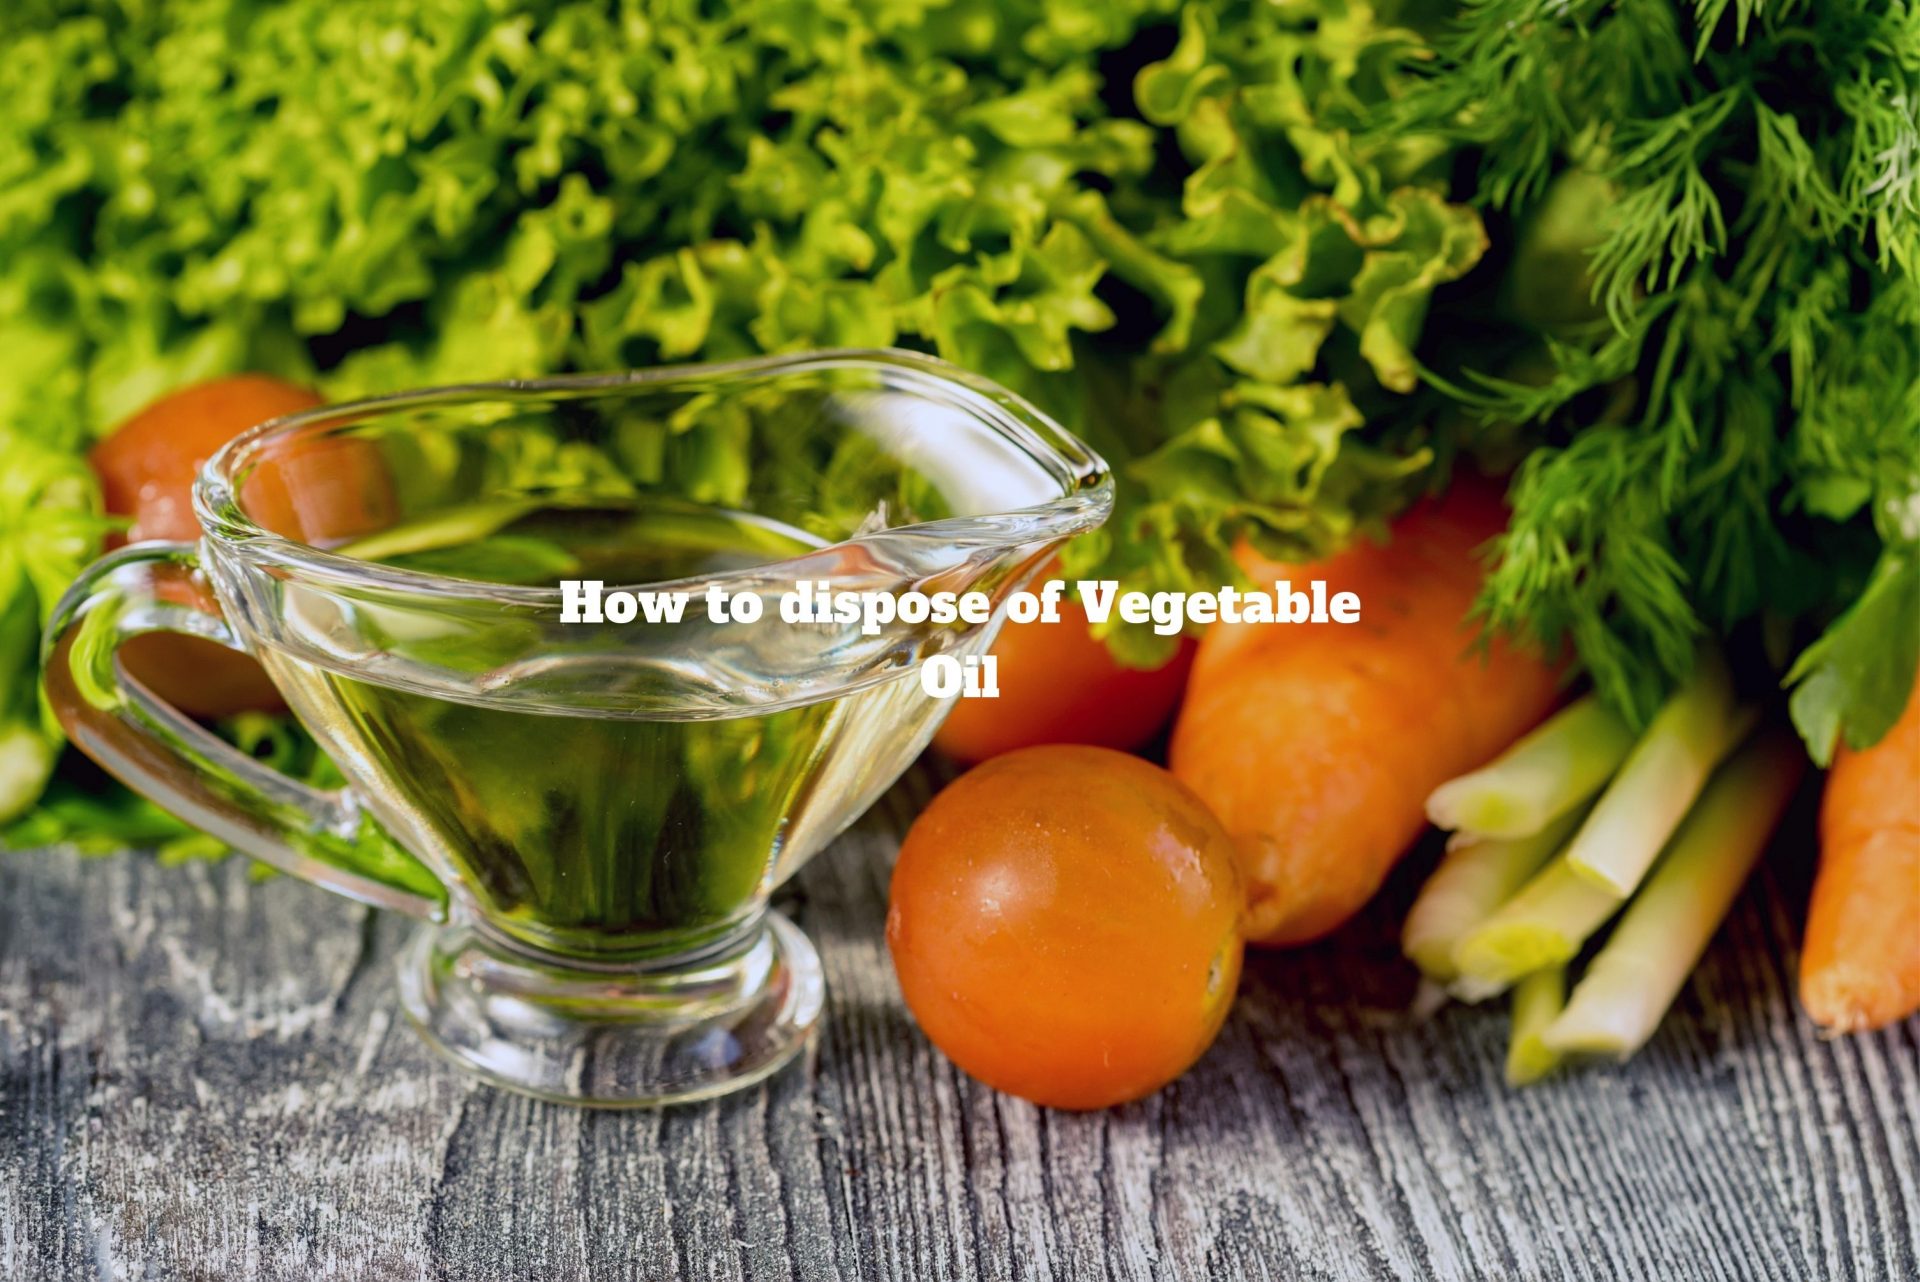 How to dispose of Vegetable Oil